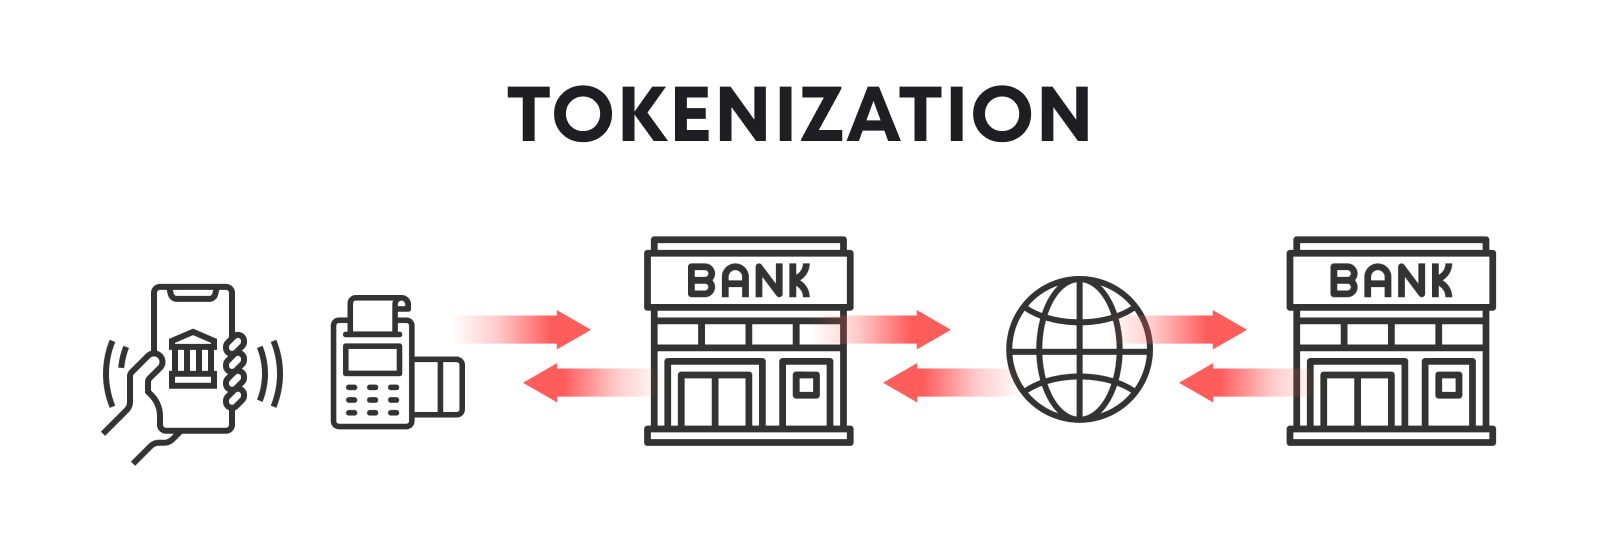 By solving inefficiencies inherent in traditional markets, particularly through blockchain technology, tokenization democratizes asset ownership.